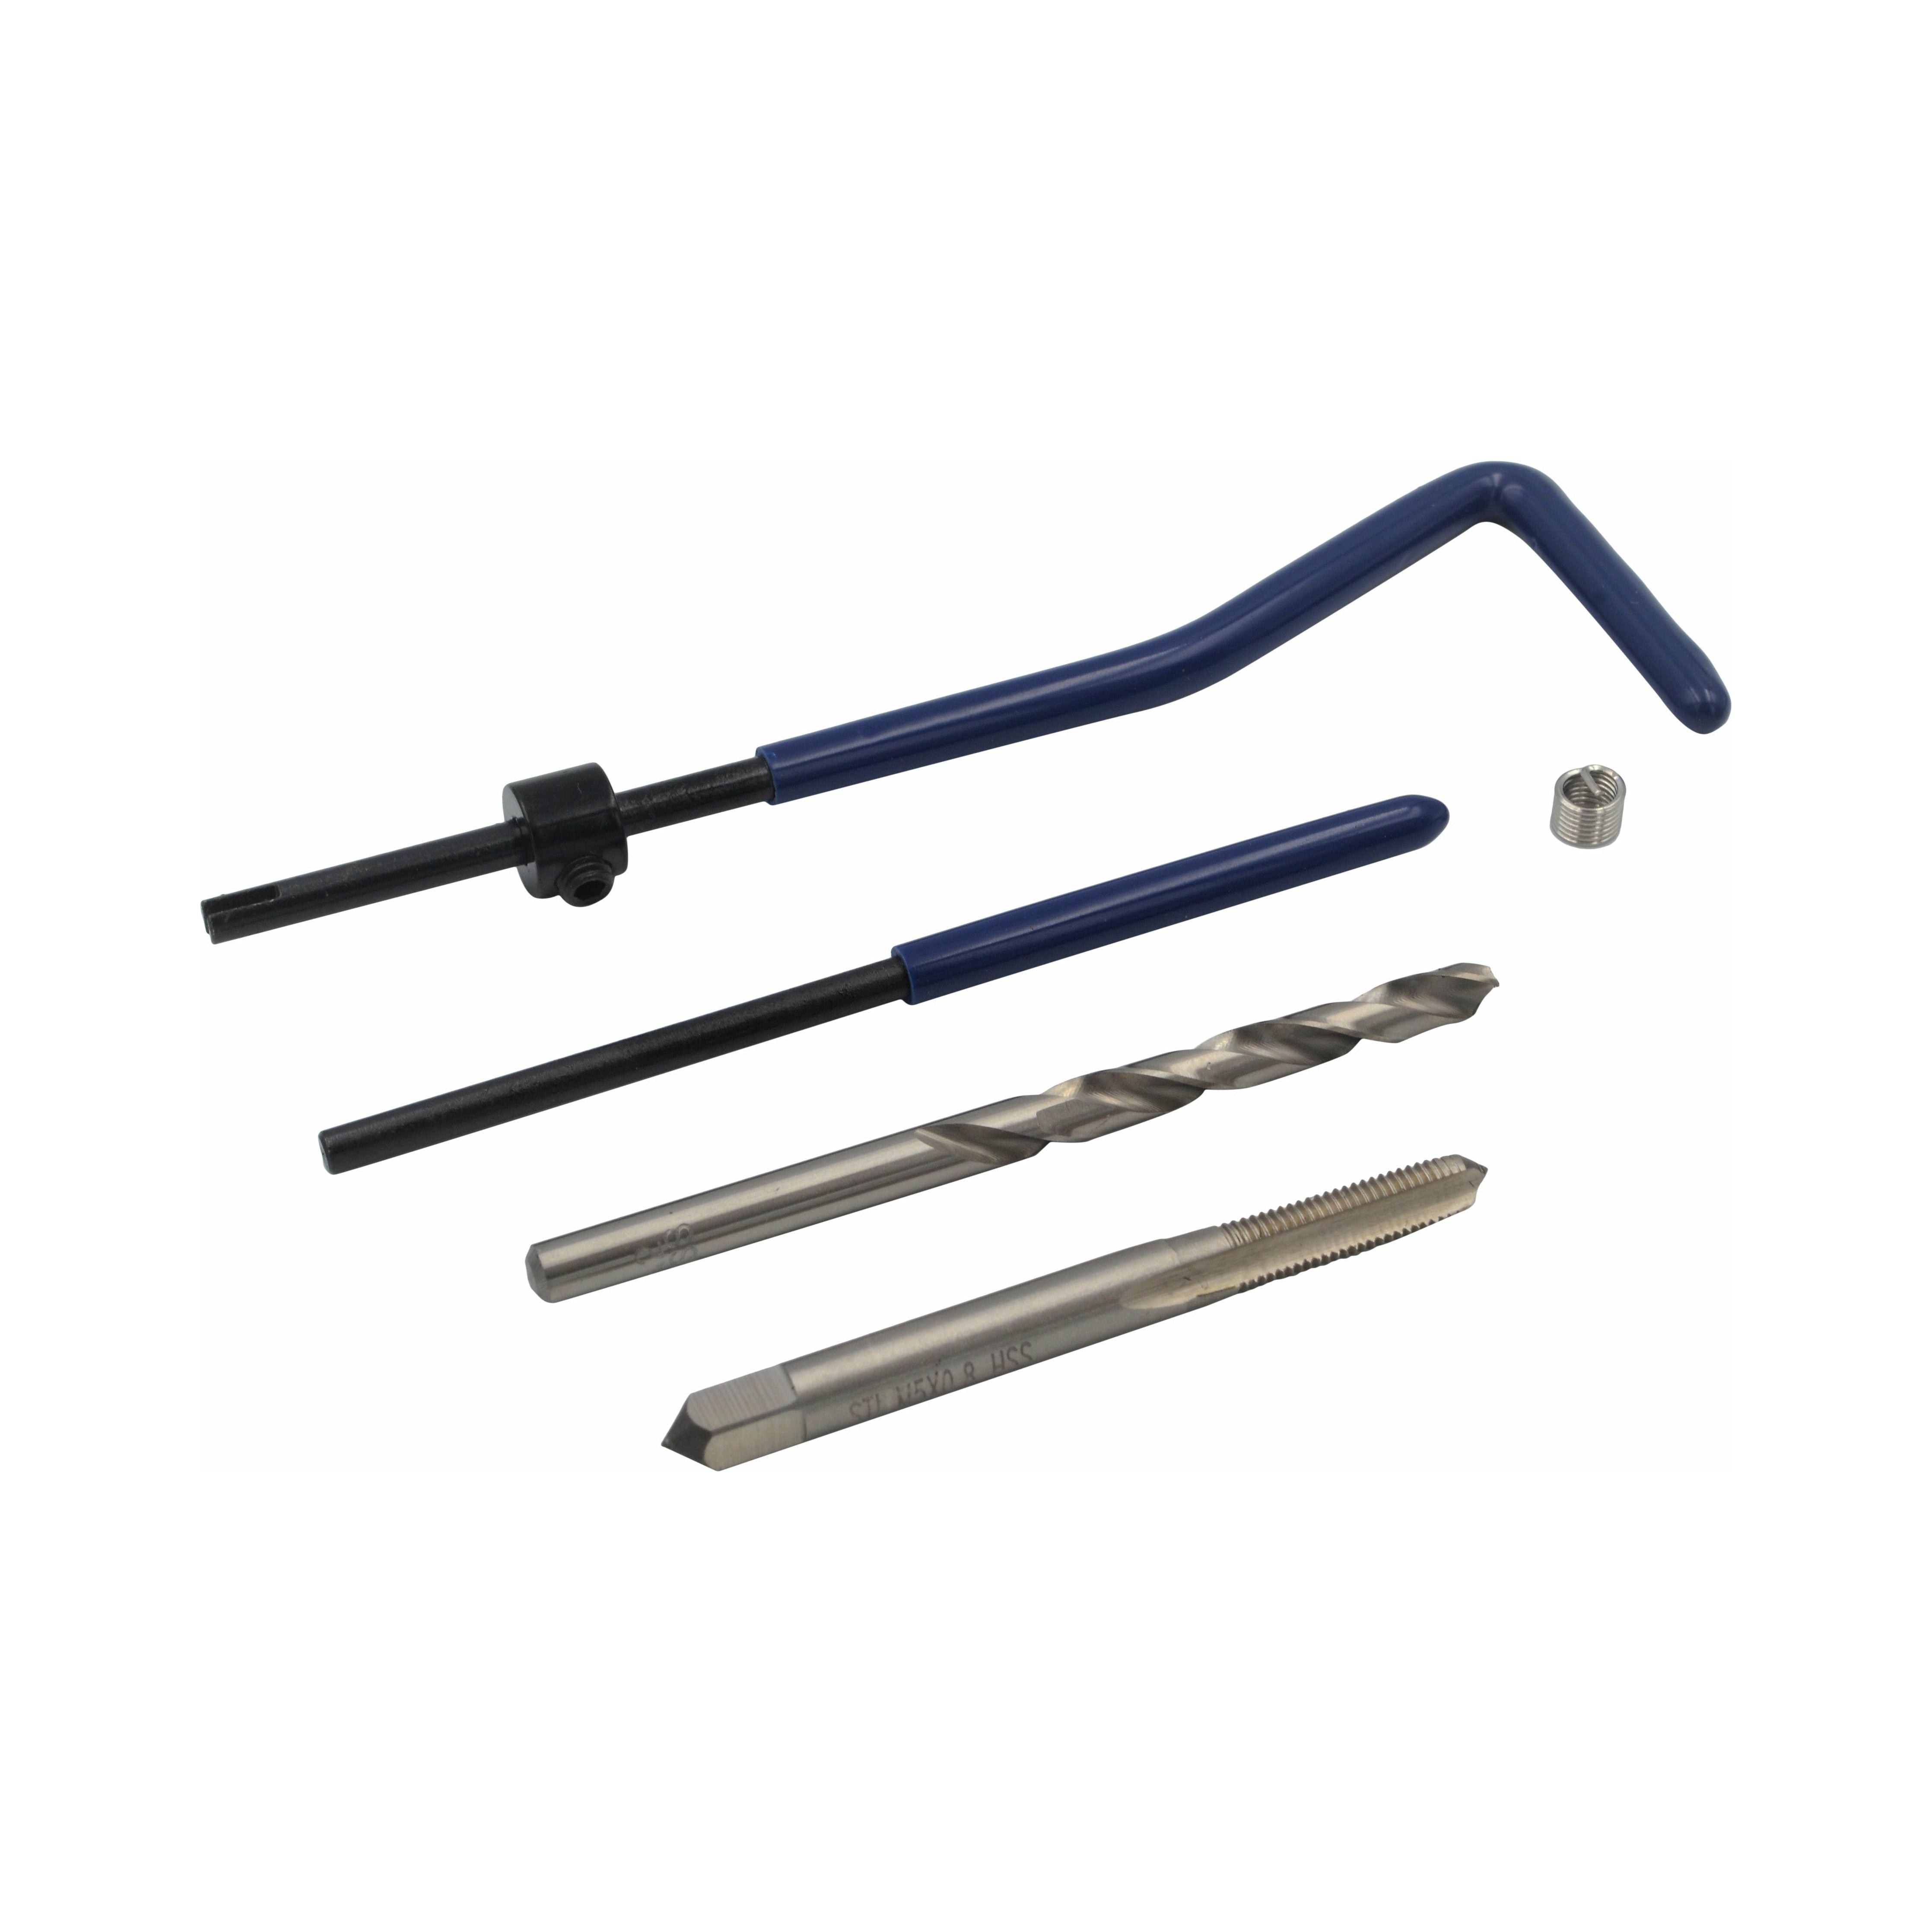 Metric Course Helicoil Thread Repair Kit M5 up to M12